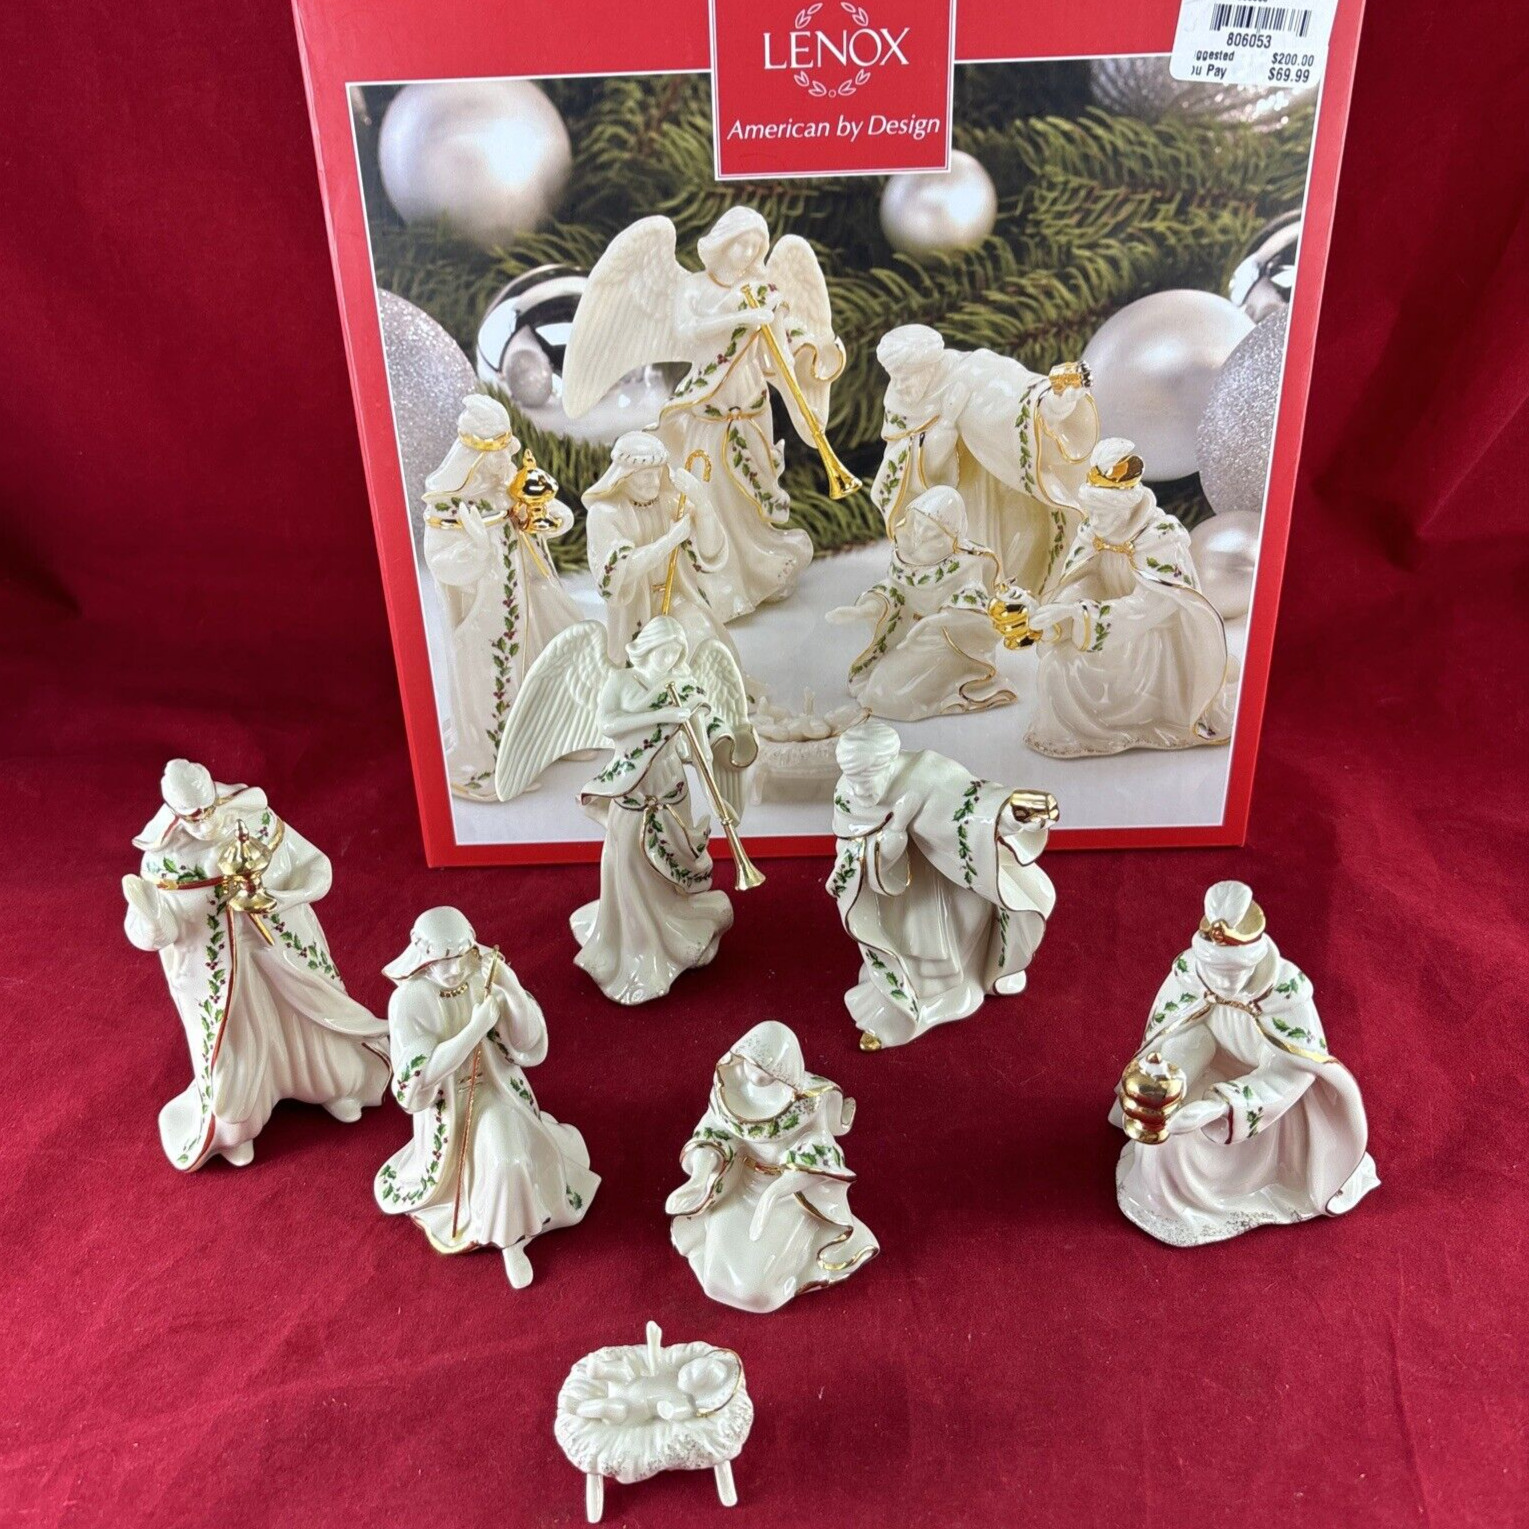 Lenox Holiday 7 Piece Nativity Set Miniature Christmas Figures Holly/Gold Accent